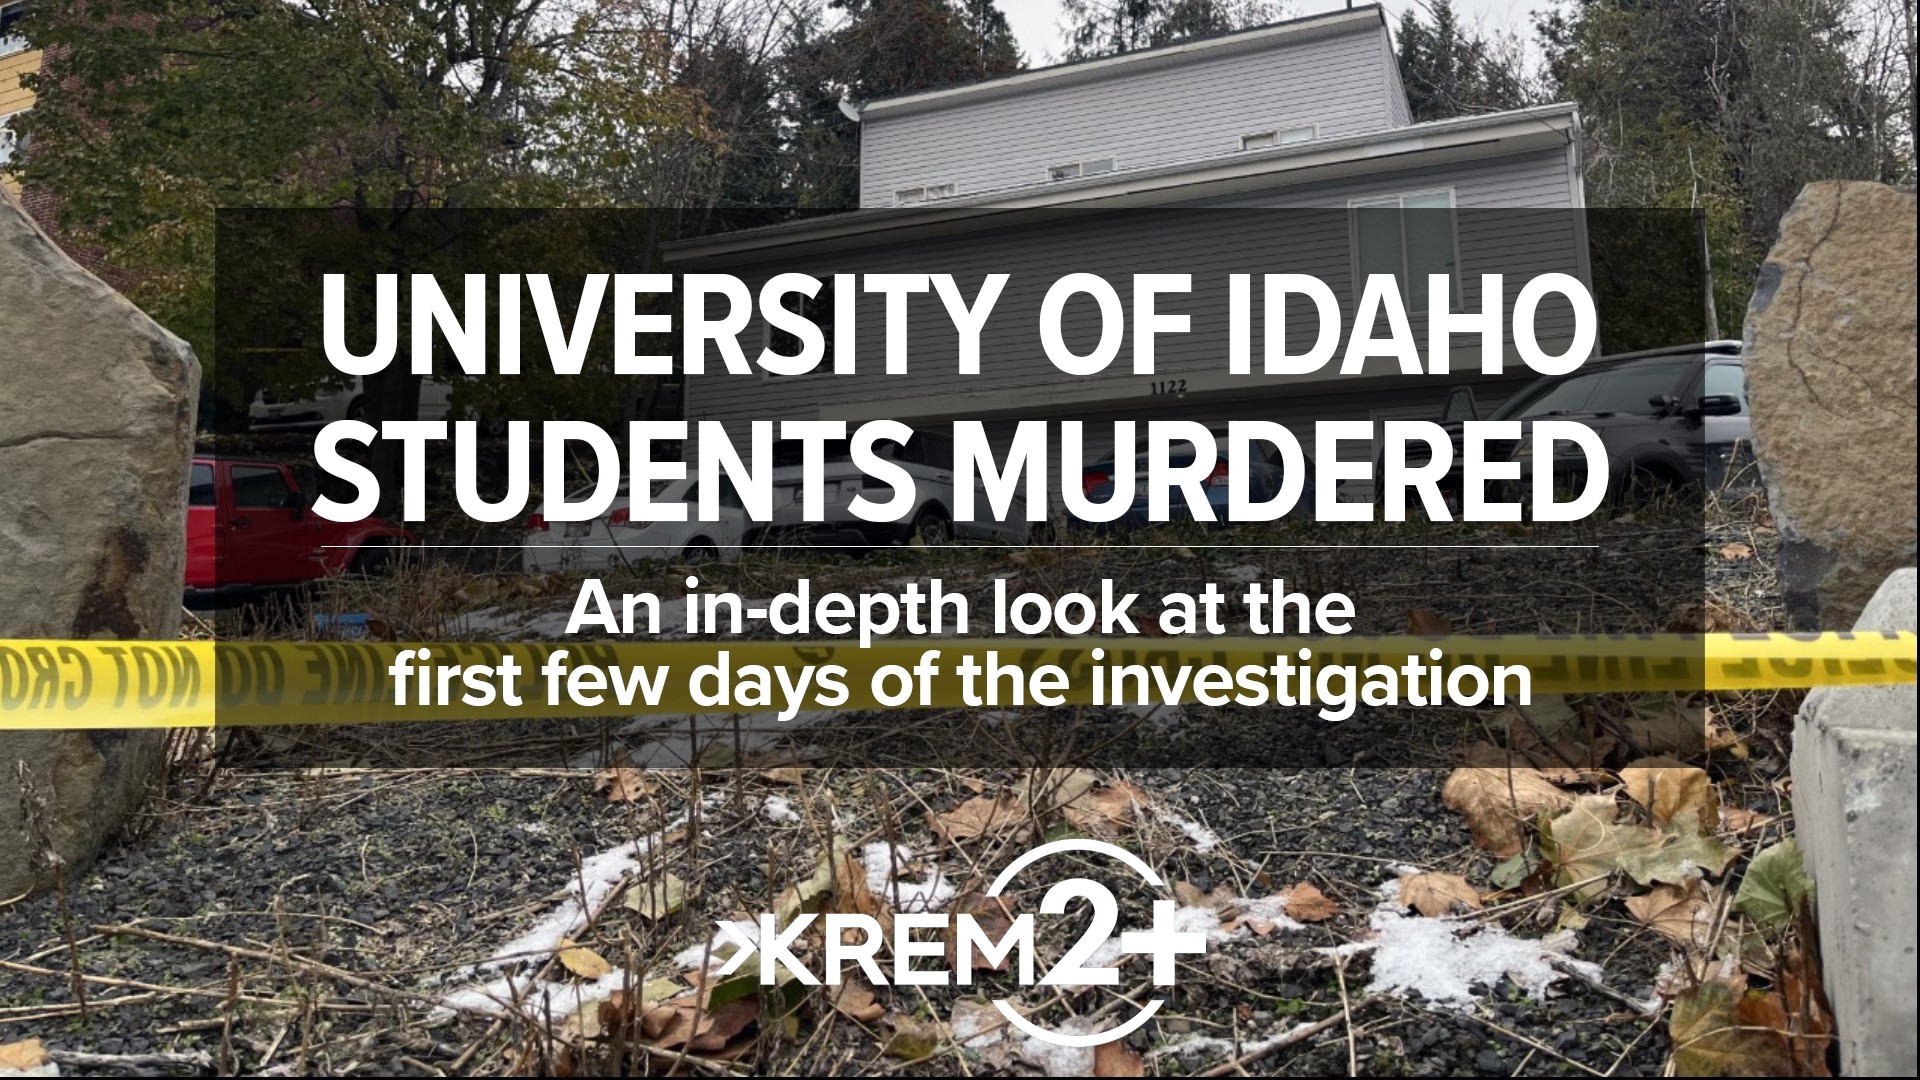 Four University of Idaho students murdered and police do not have any suspects in custody. This is KREM 2 News coverage of the first days of the investigation.